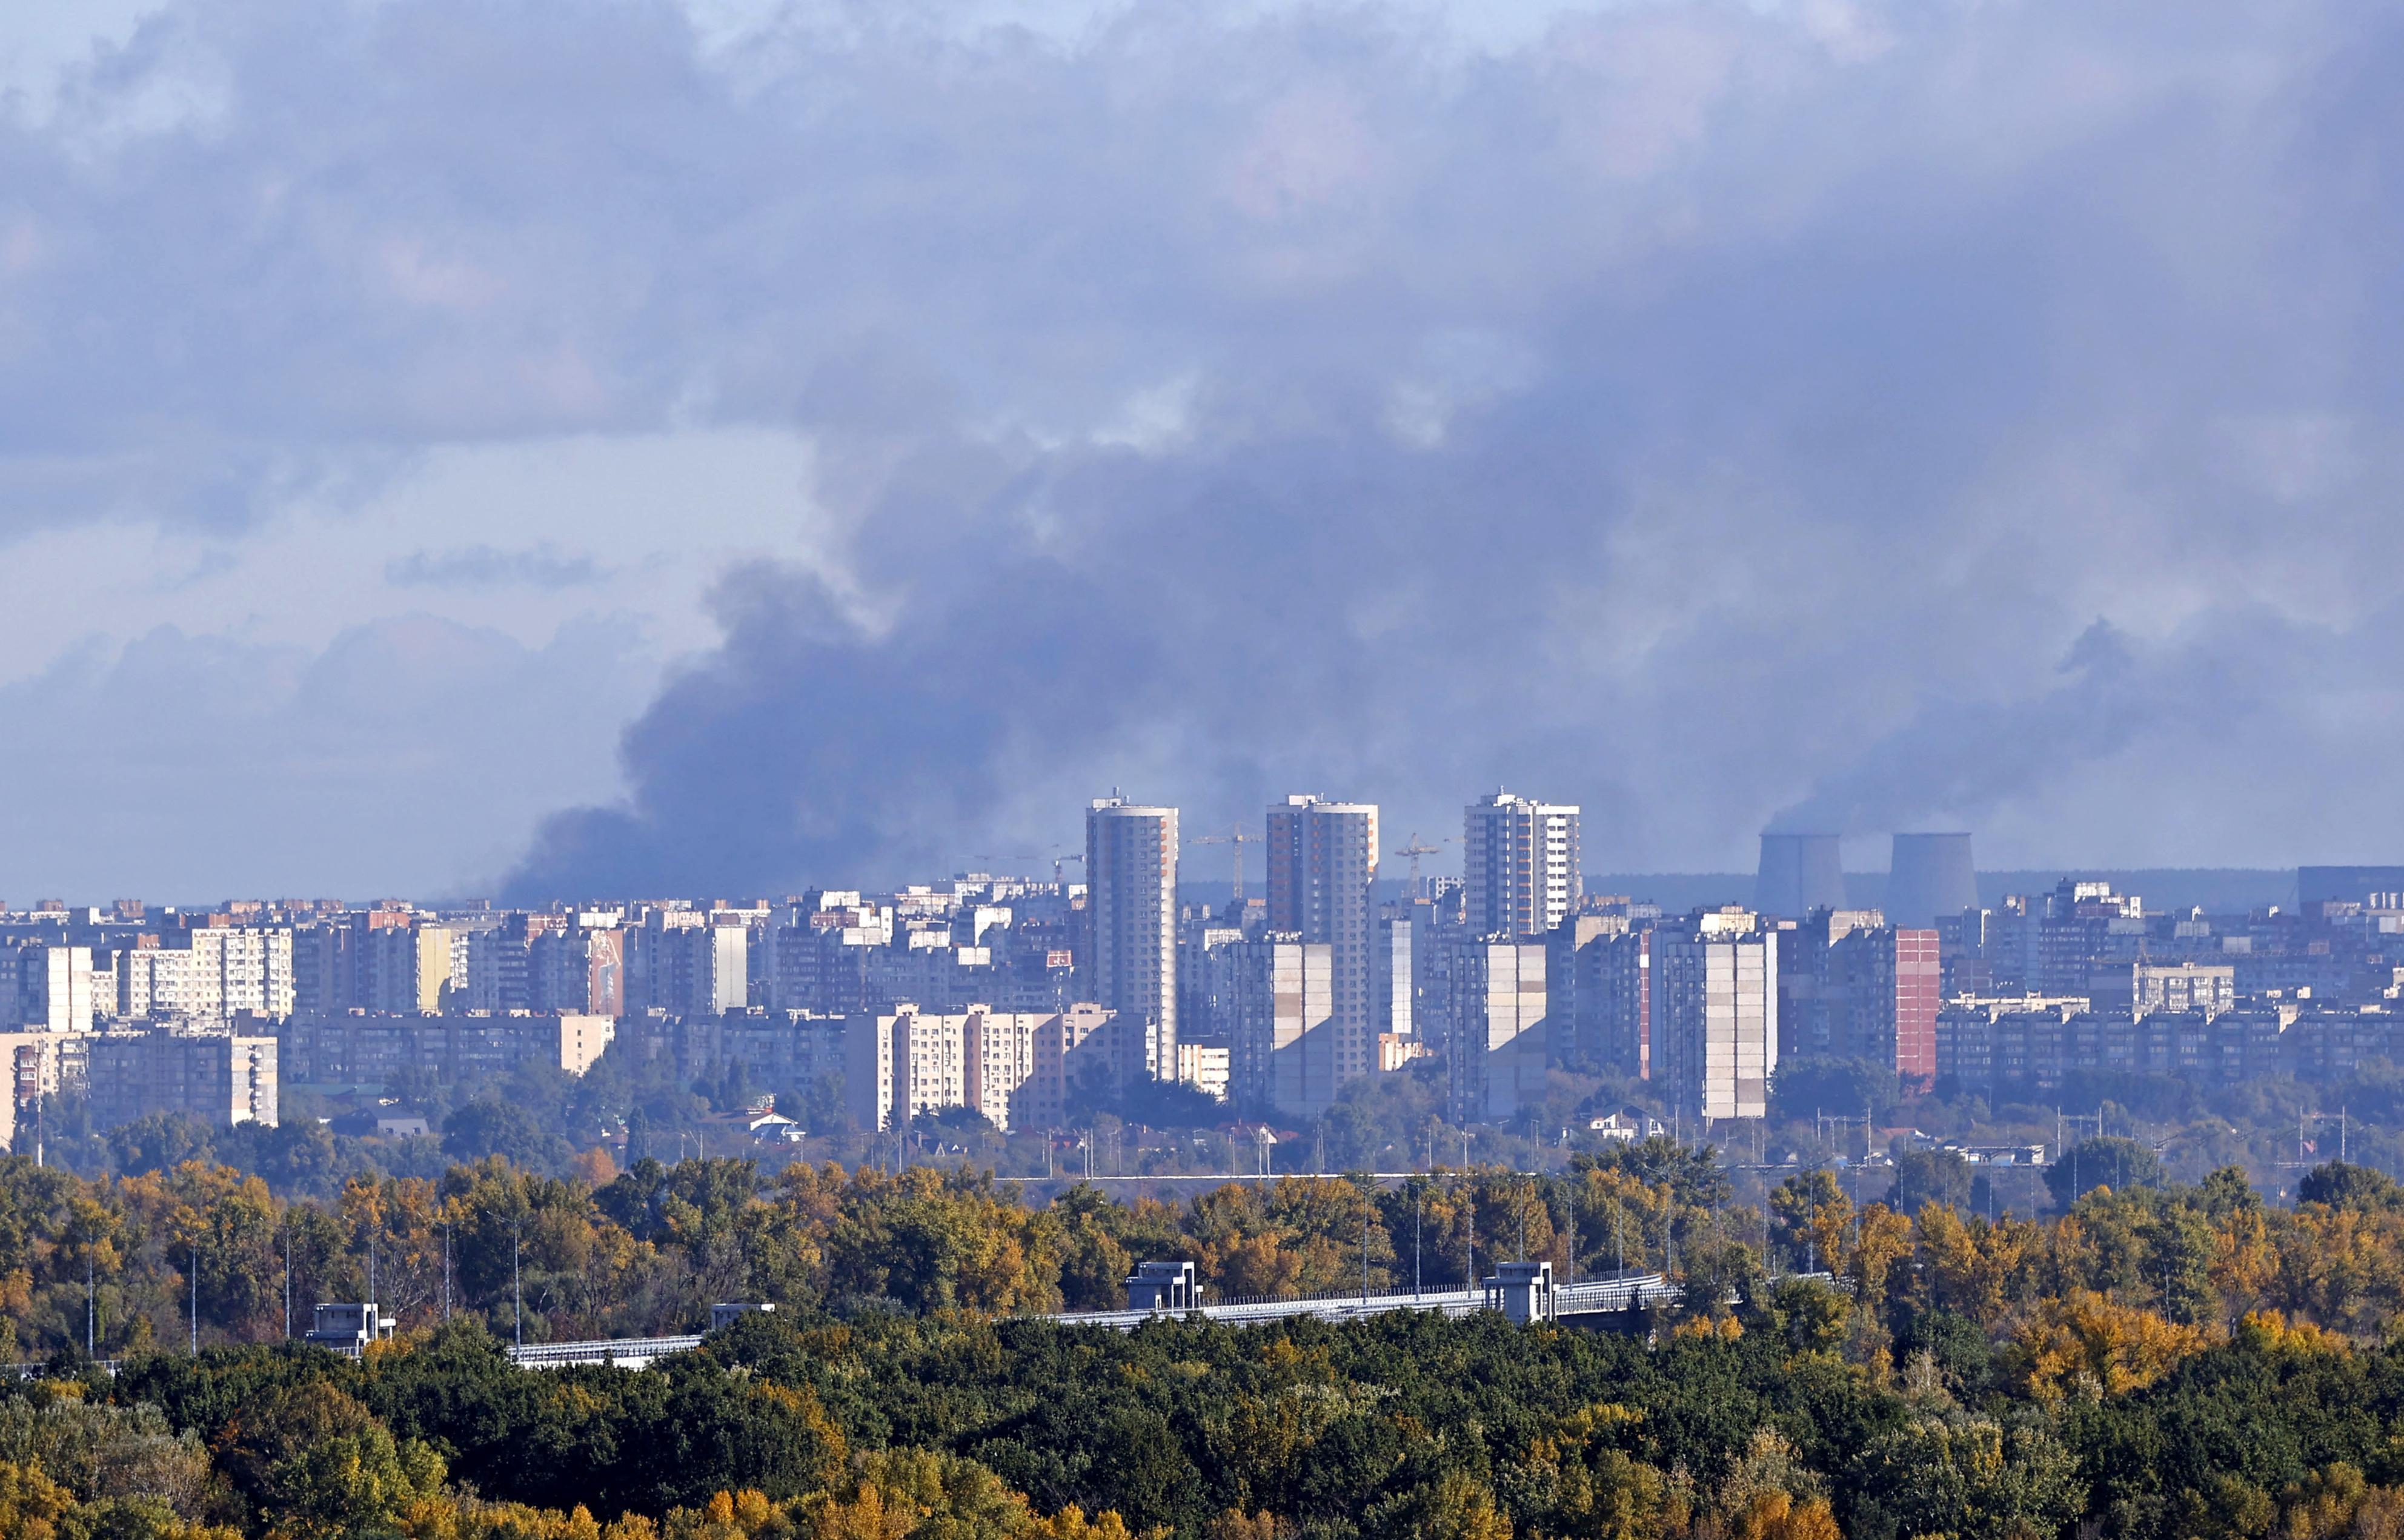 Black smoke rises over Ukraine's capital Kyiv on Oct. 10, 2022, following Russian missile attacks earlier in the day. (Kyodo/AP)